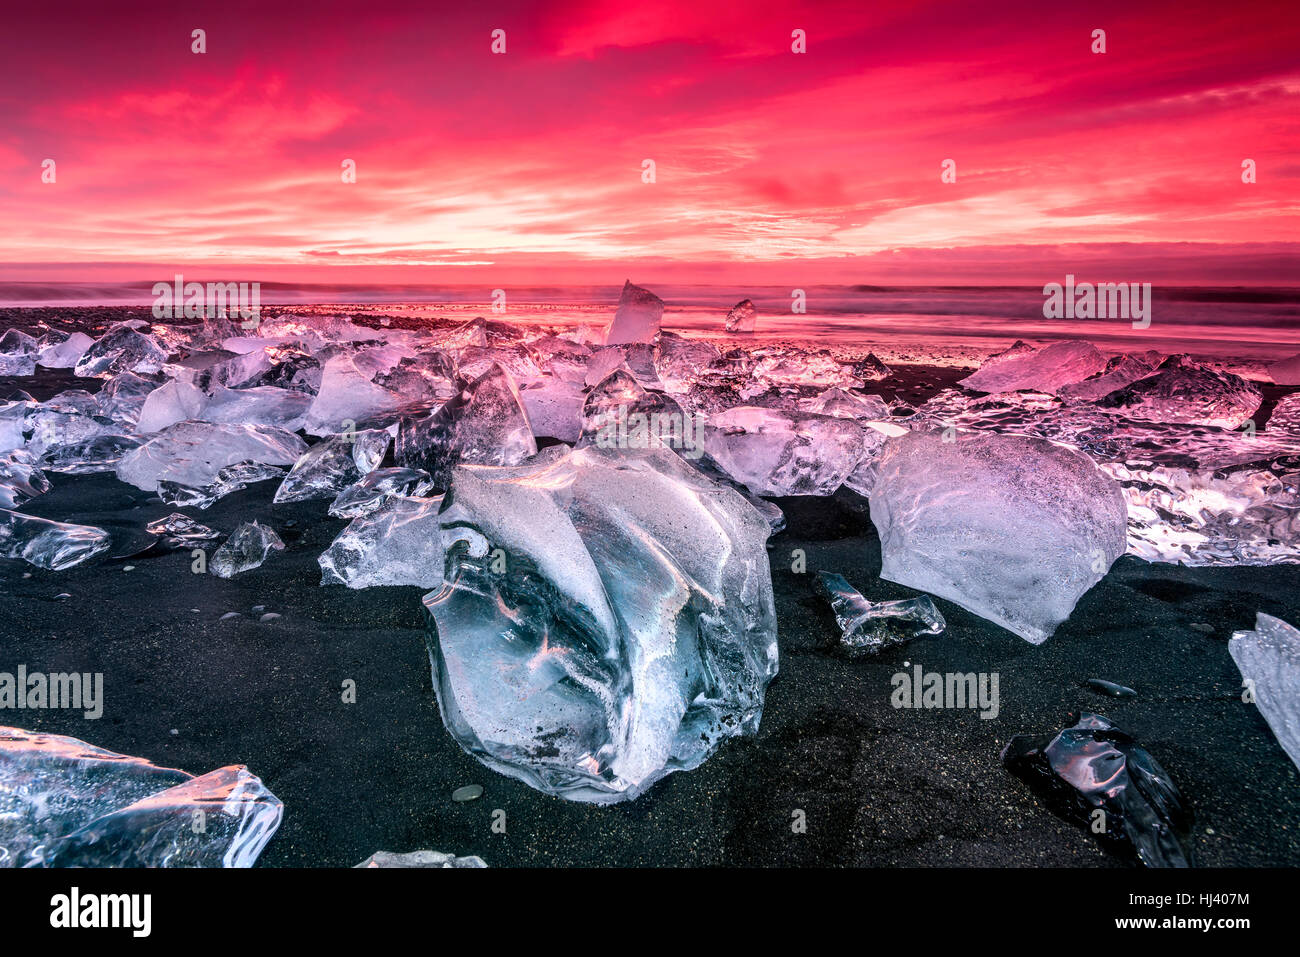 An iceberg along the shore of Jokulsarlon glacial lagoon during a vibrant red sunrise rests motionless as it is framed by cold ocean water. Stock Photo